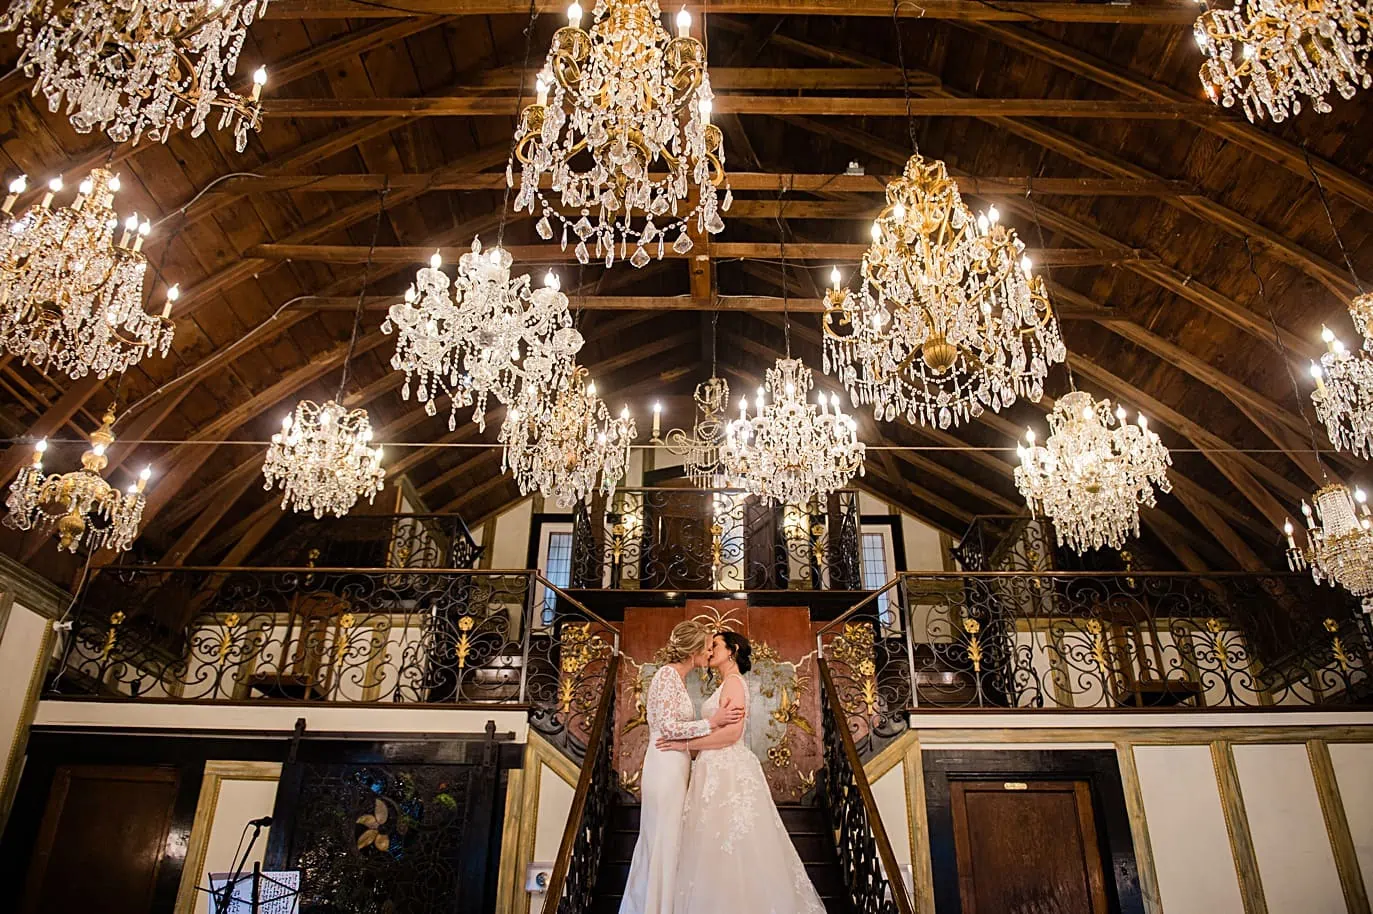 two brides kiss on the stairs after their wedding in the chandelier barn at the Lionsgate Event Center